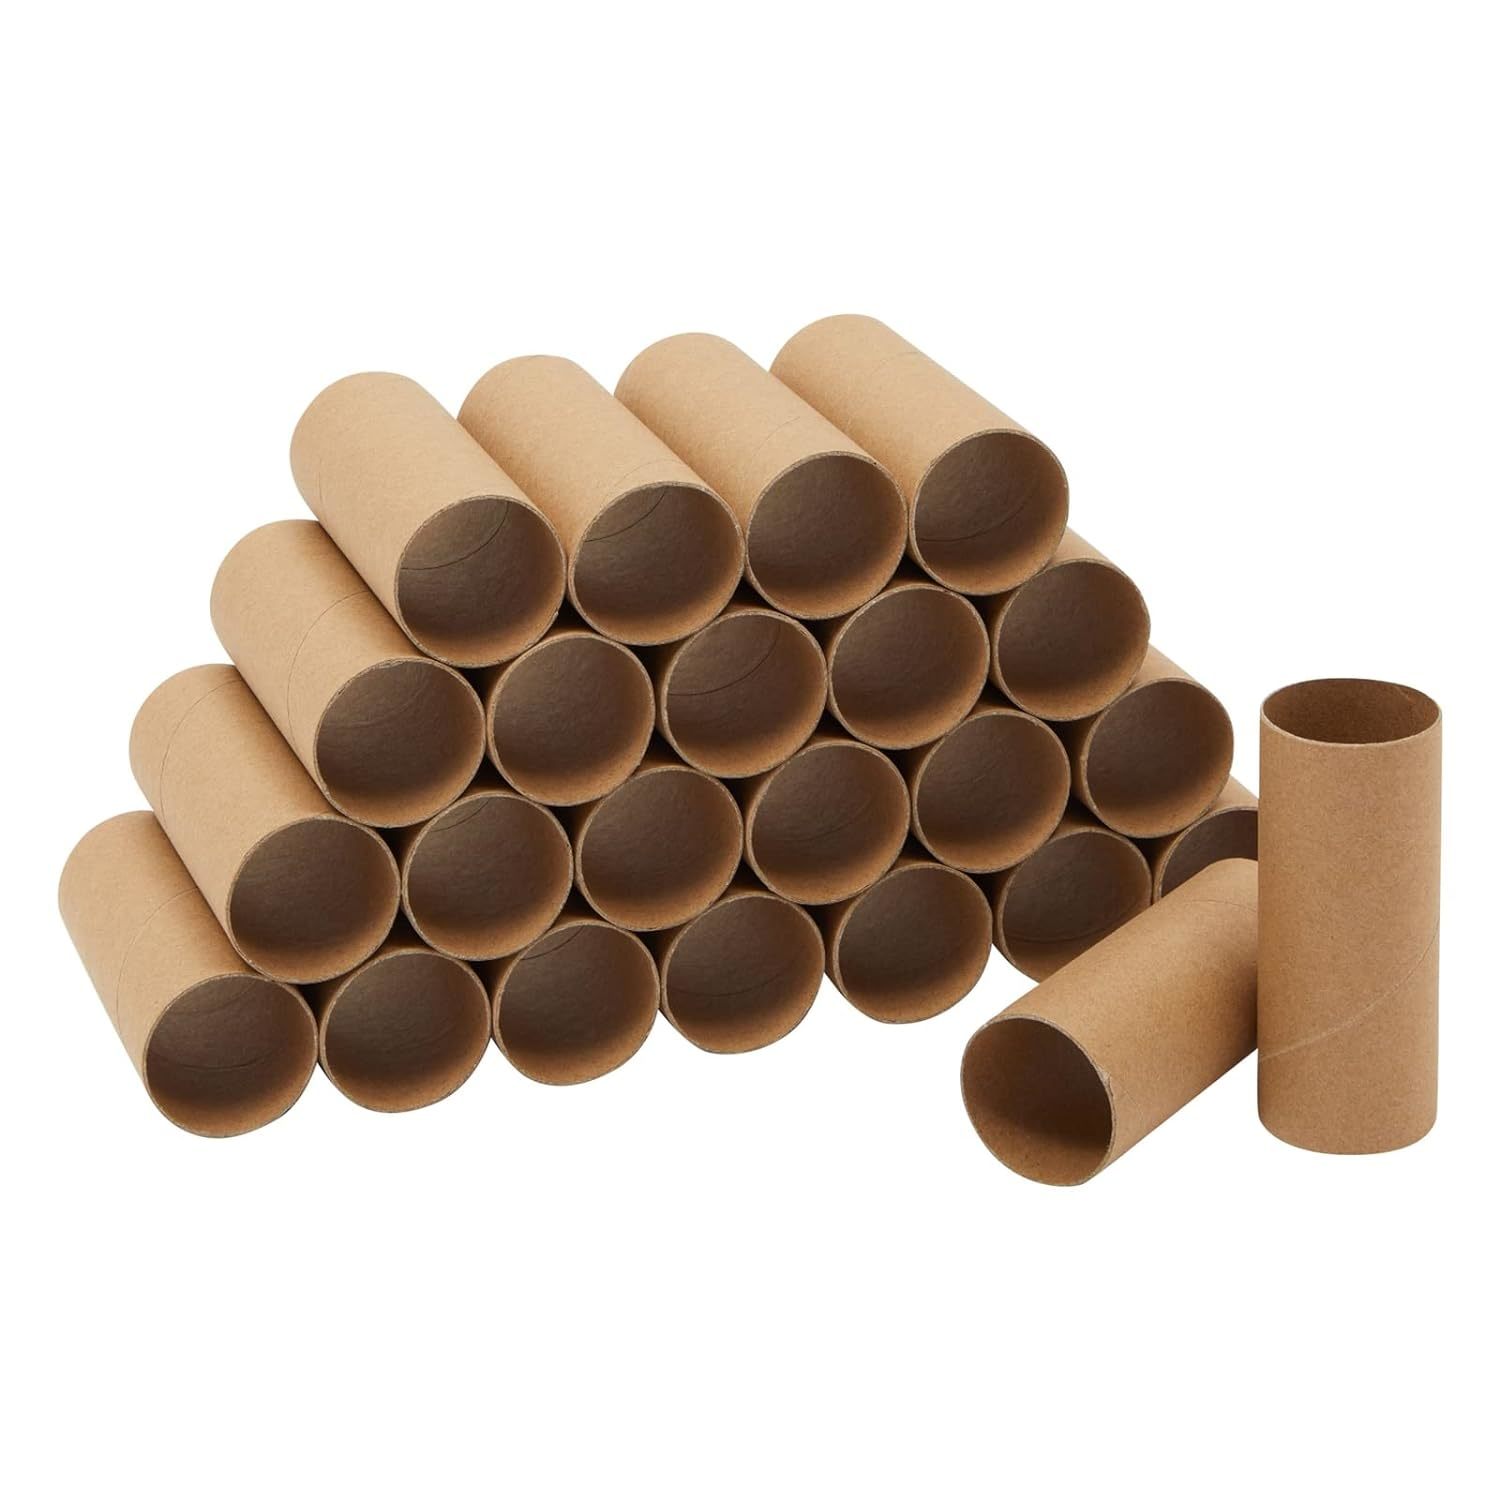 36 Pcs 1.77 x 10 Cardboard Tubes for Crafts Cardboard Paper Thick Craft Rolls